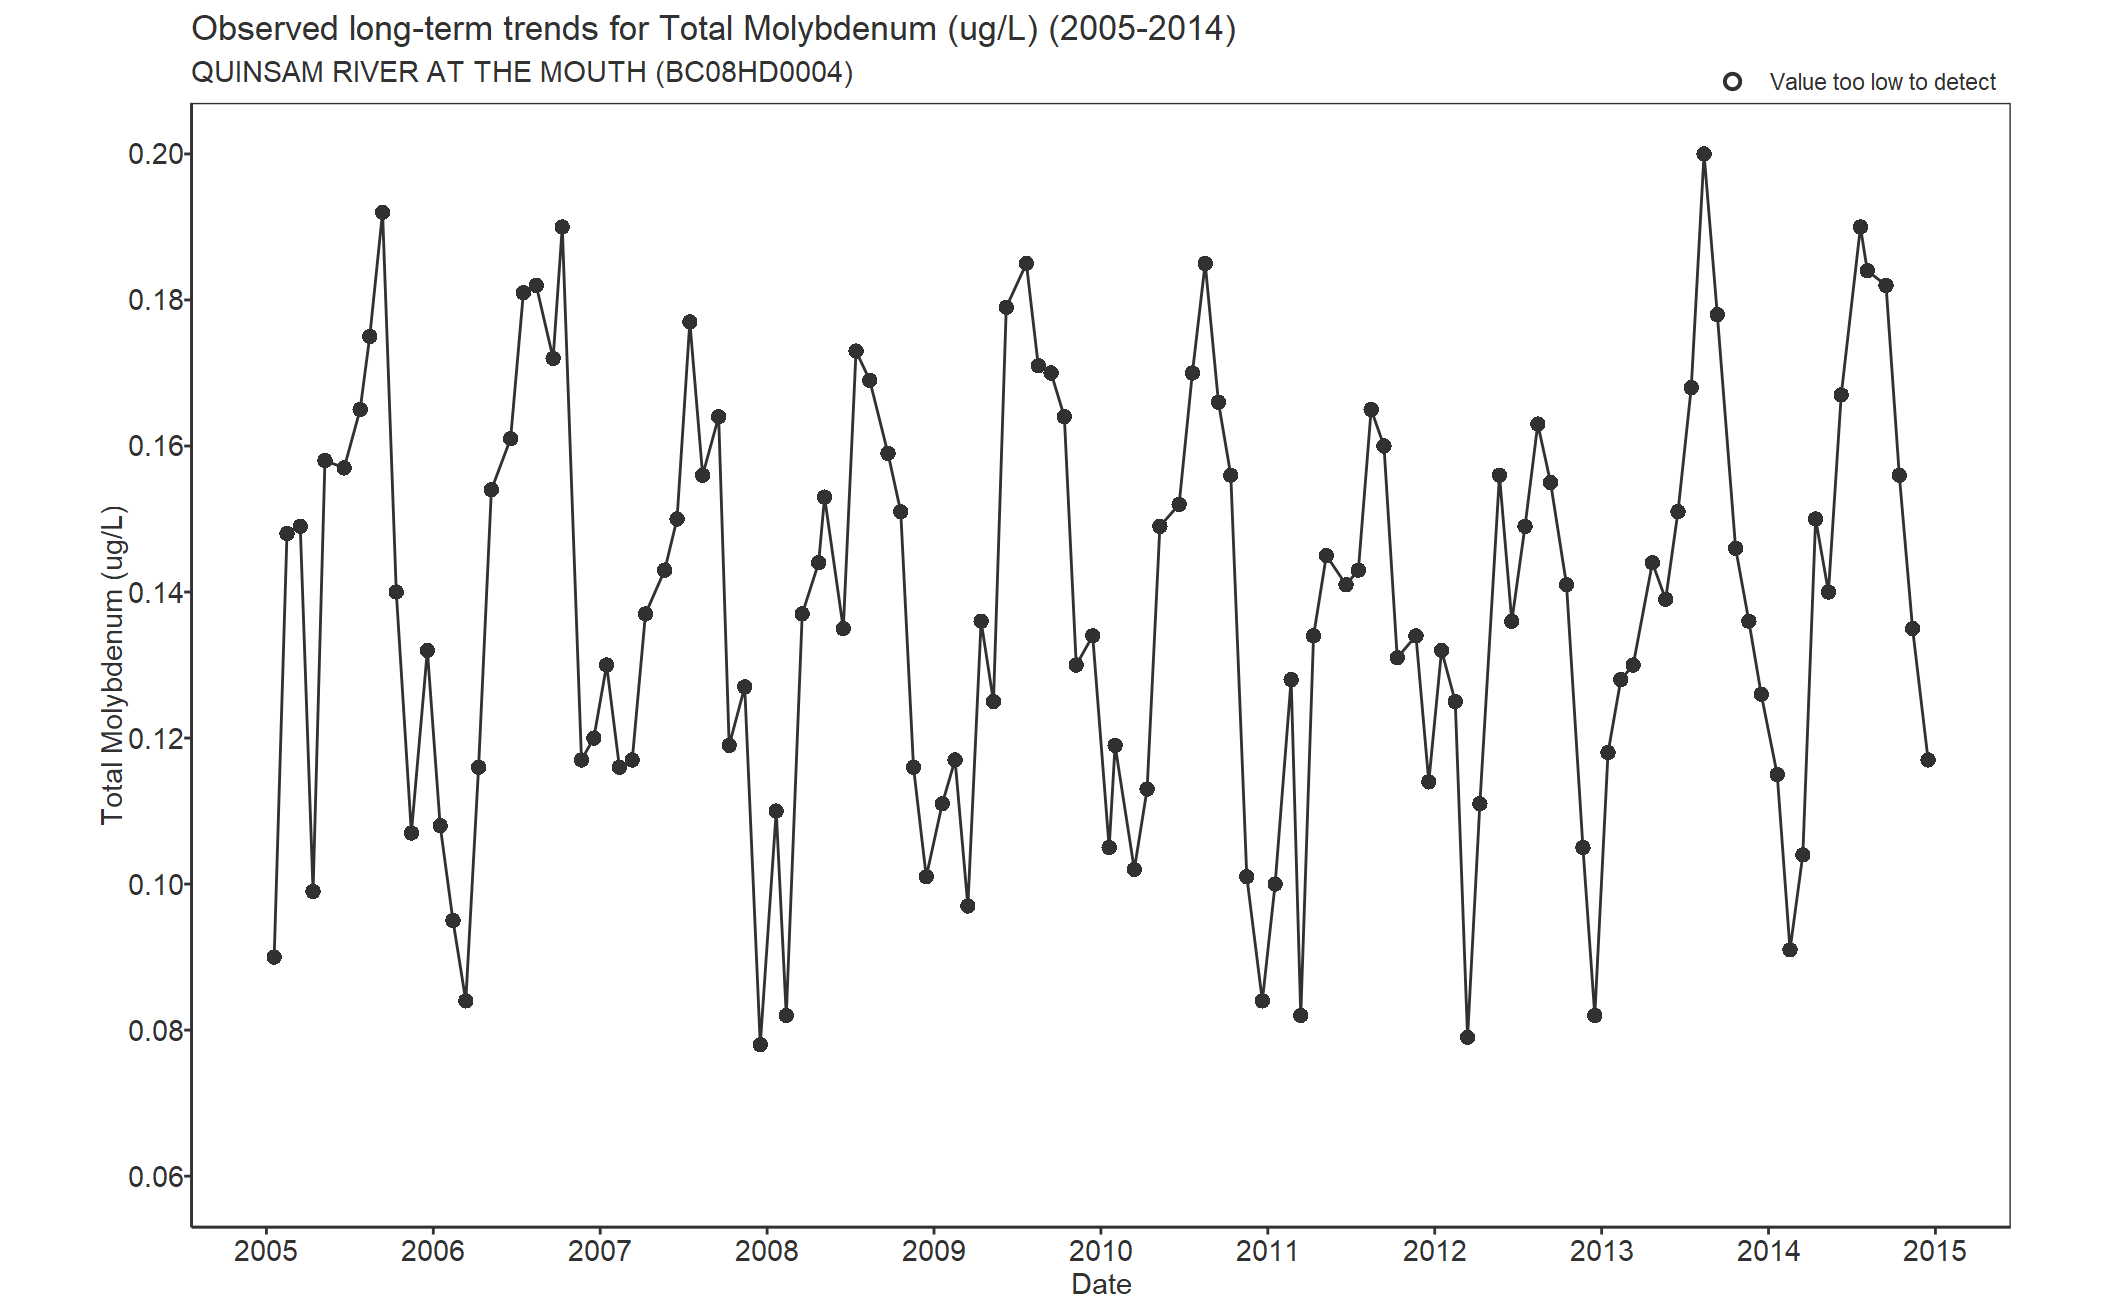 Observed long-term trends for Total Molybdenum (2005-2014)